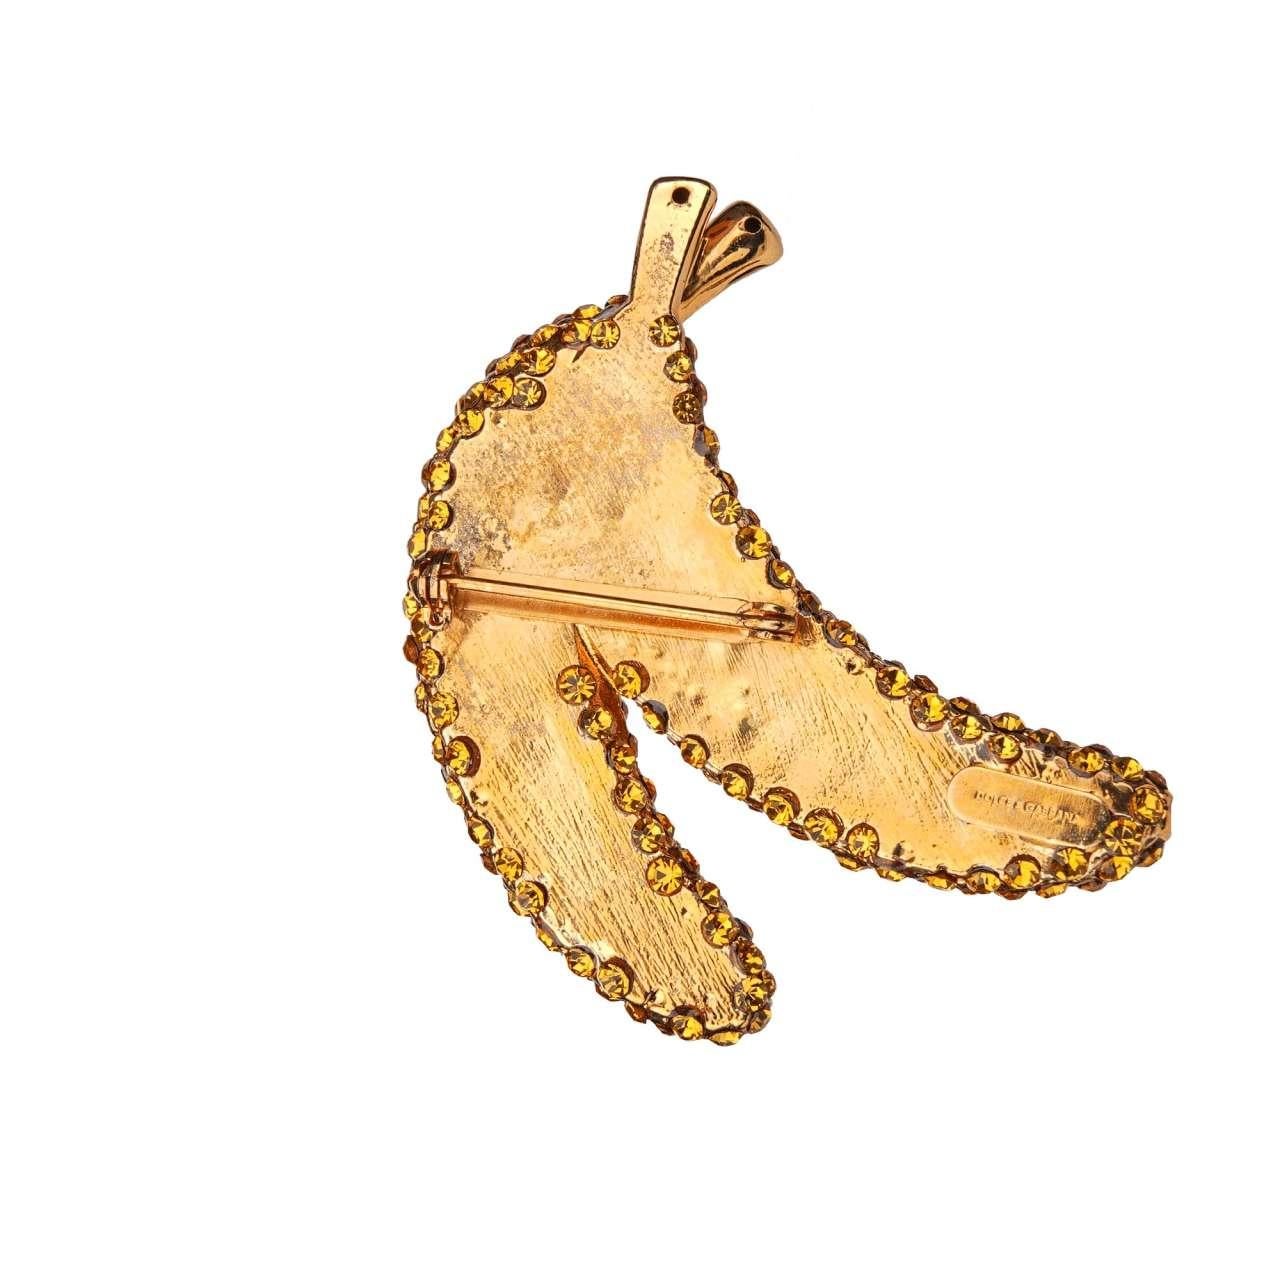 - Banana Brooch with crystals in yellow and gold by DOLCE & GABBANA - RUNWAY - Dolce & Gabbana Fashion Show - Former RRP: EUR 435 - New with Tag - MADE IN ITALY - Yellow crystals - Nickel free - Model: WPJ2F9-W0001-ZOO00 - Material: 60% Brass, 40%